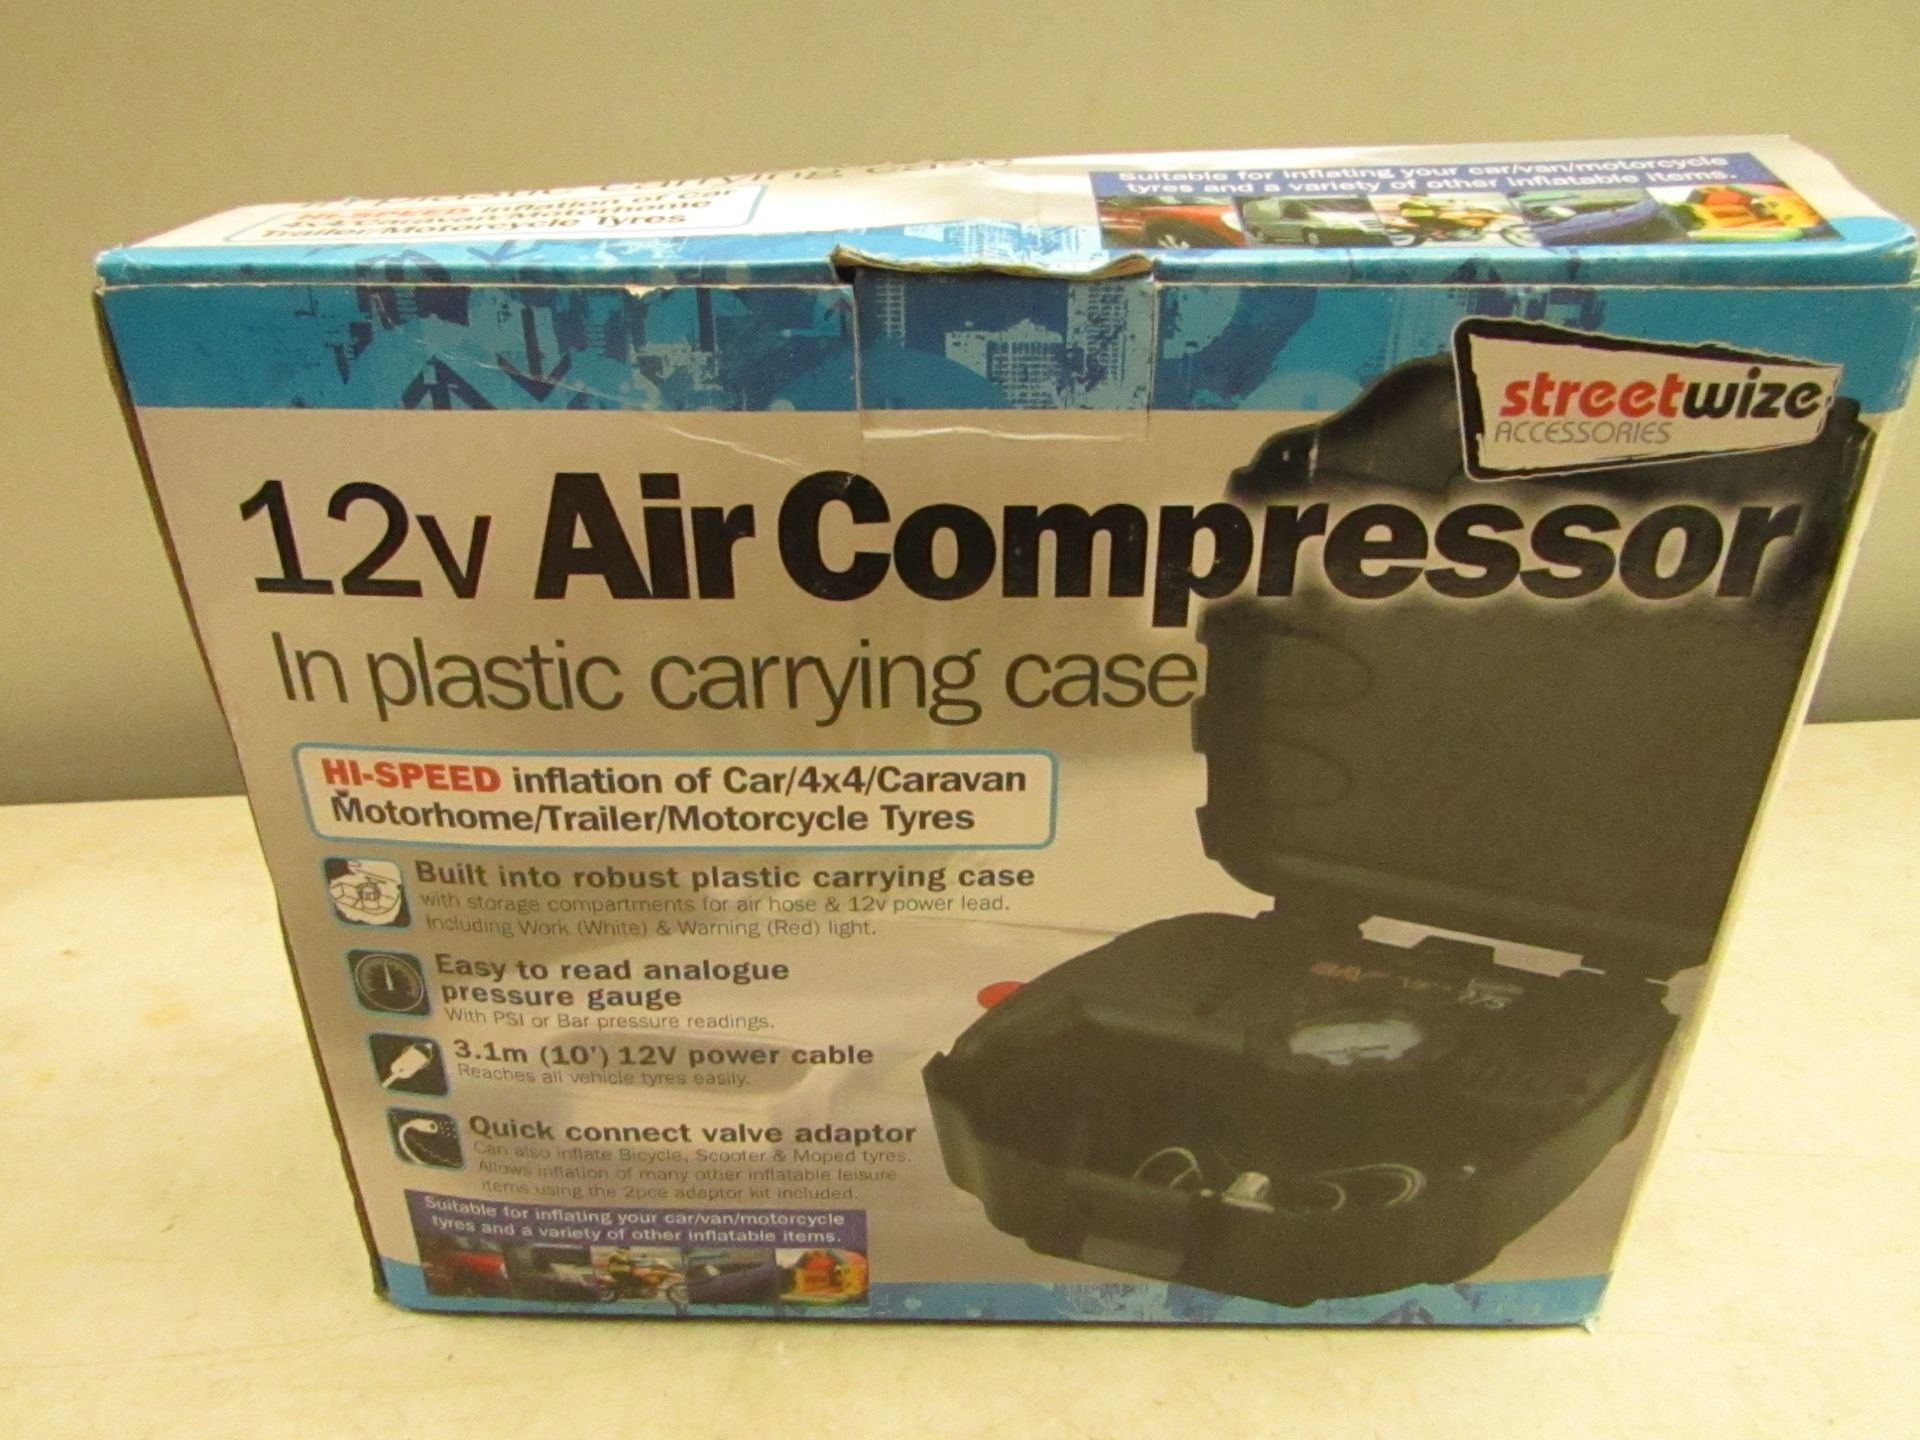 Streetwize 12v air compressor in carry case, boxed and unchecked